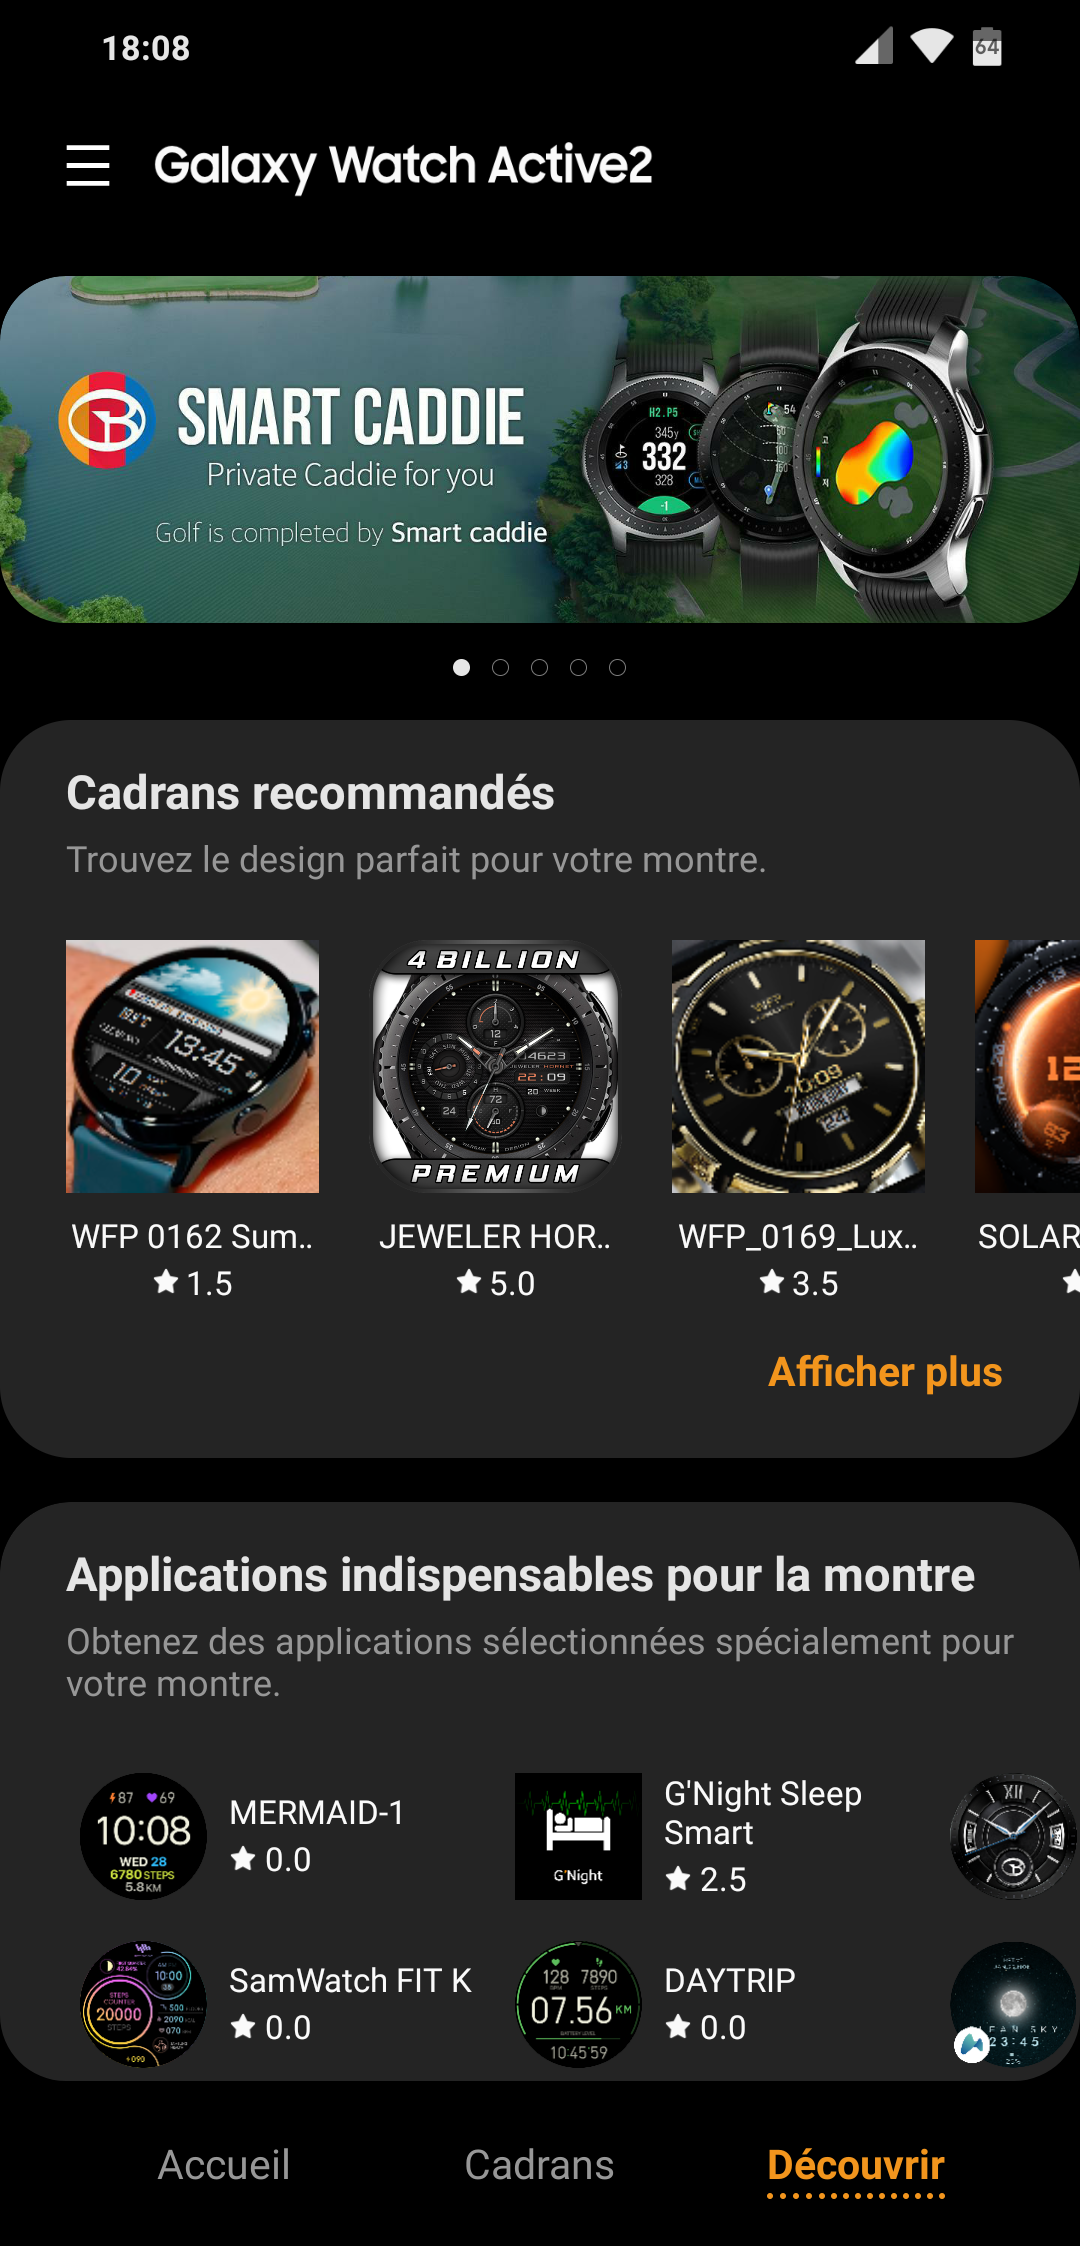 Galaxy Watch Active 2 - Magasin applications